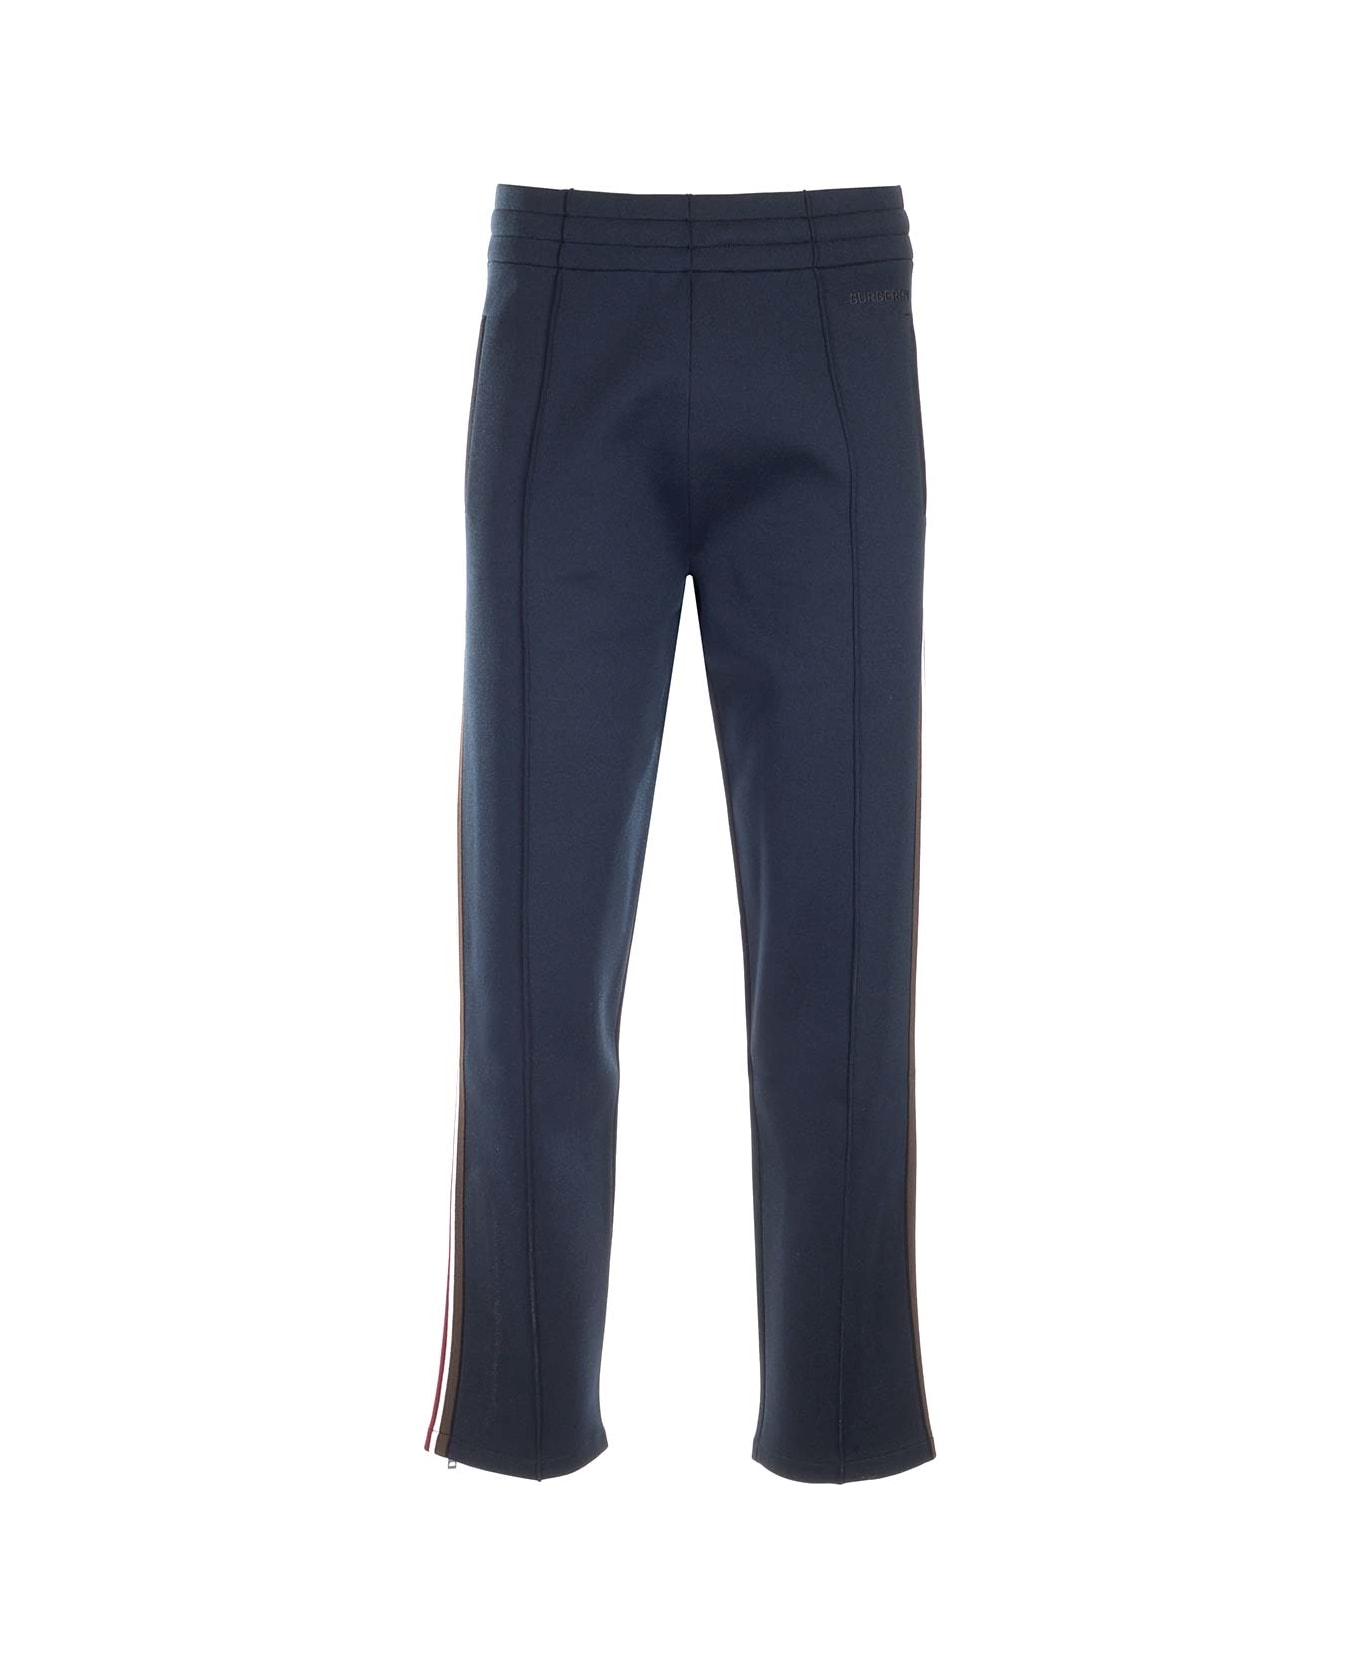 Burberry Pants With Striped Bands - Blue